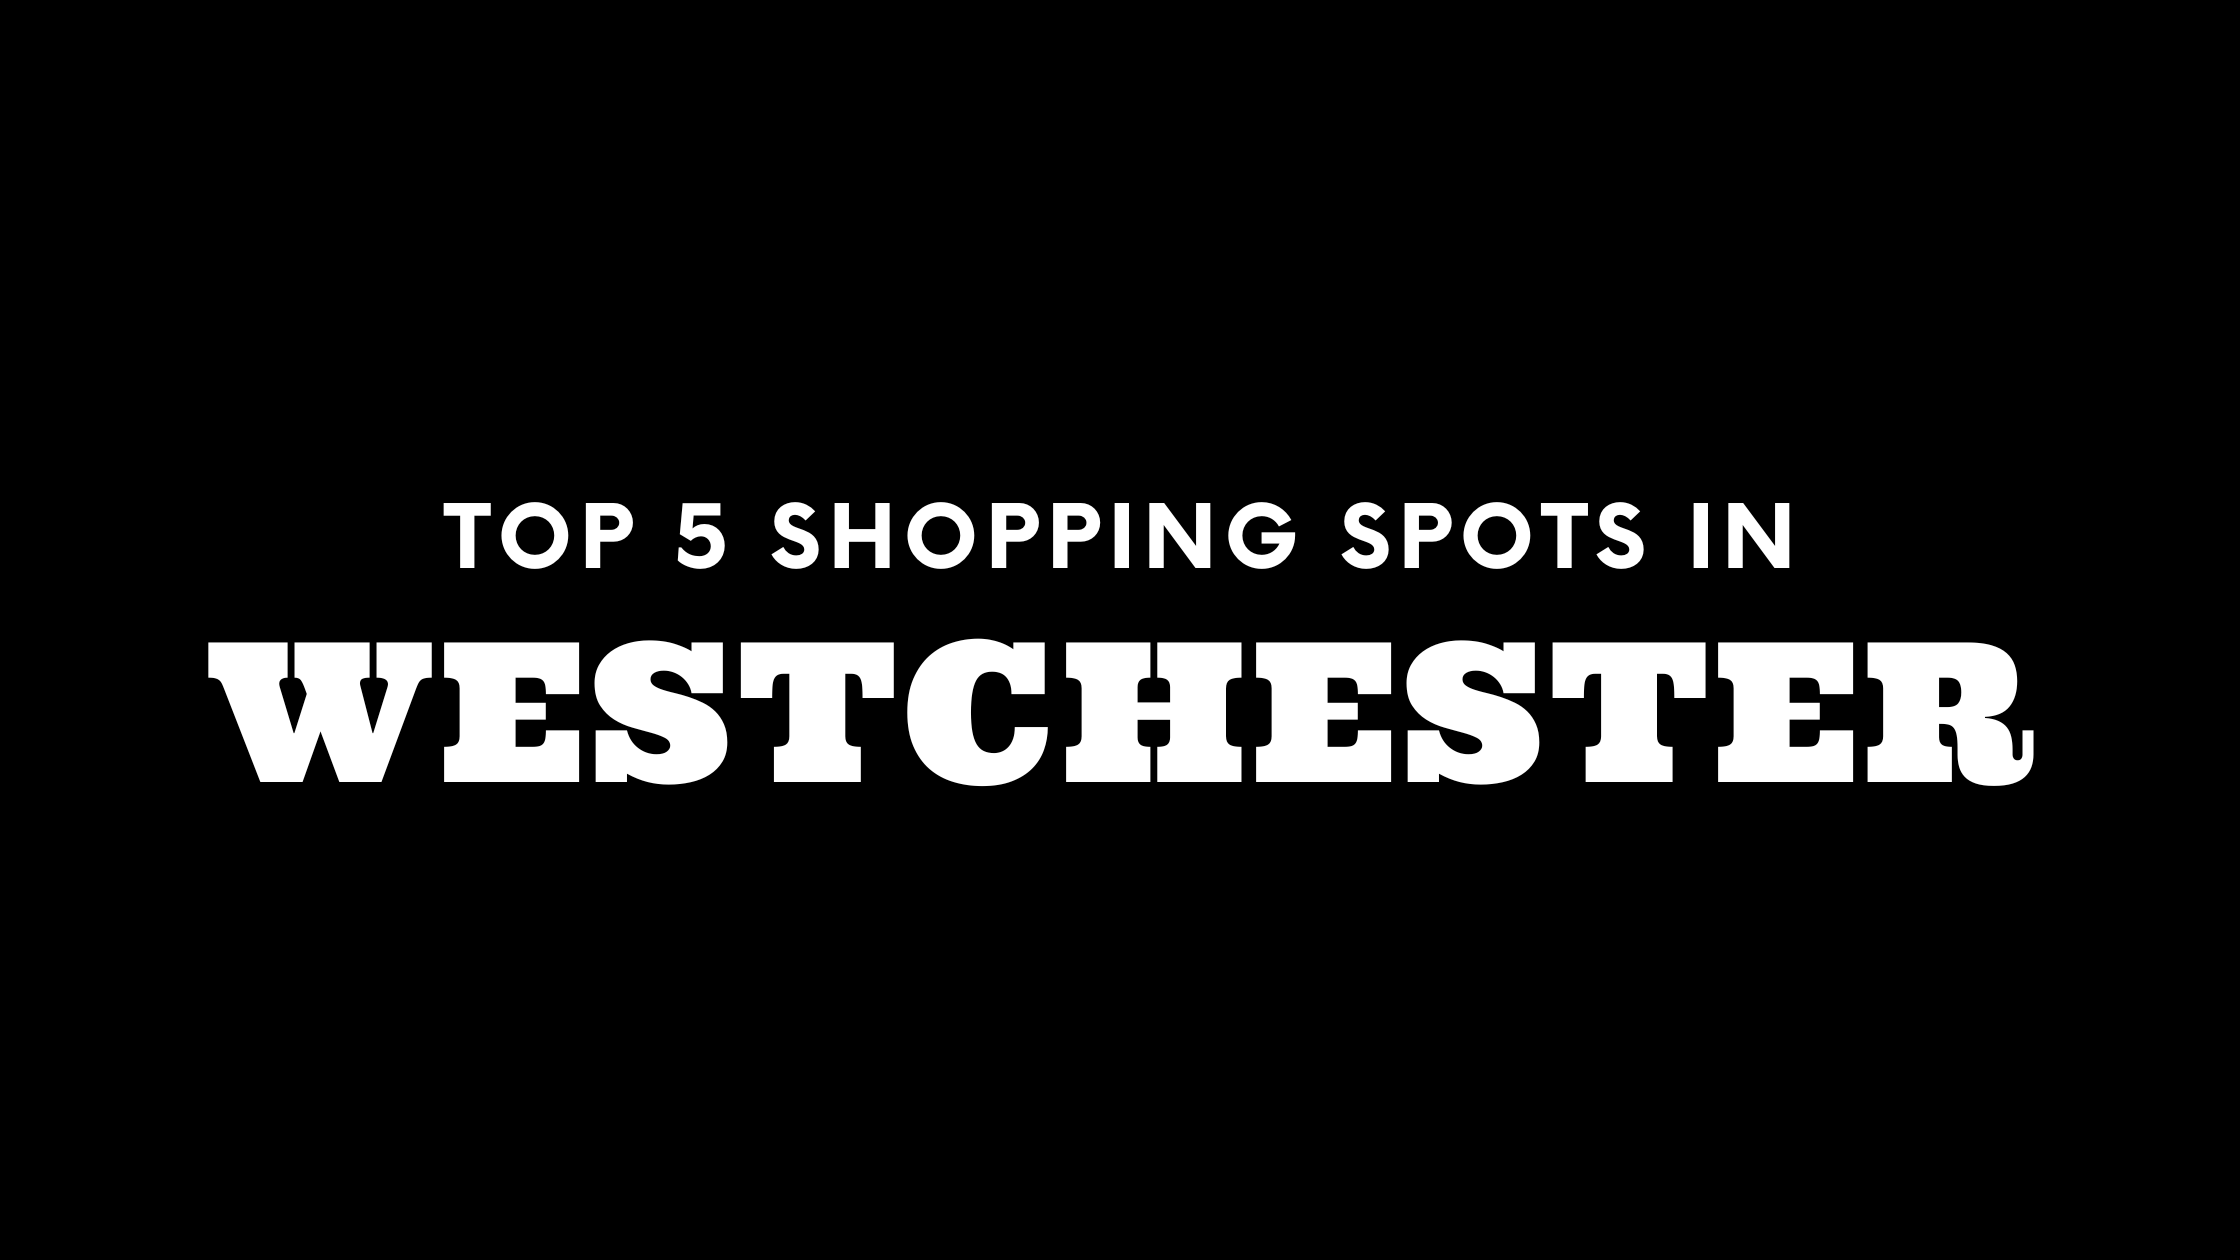 Top 5 Shopping Spots in Westchester